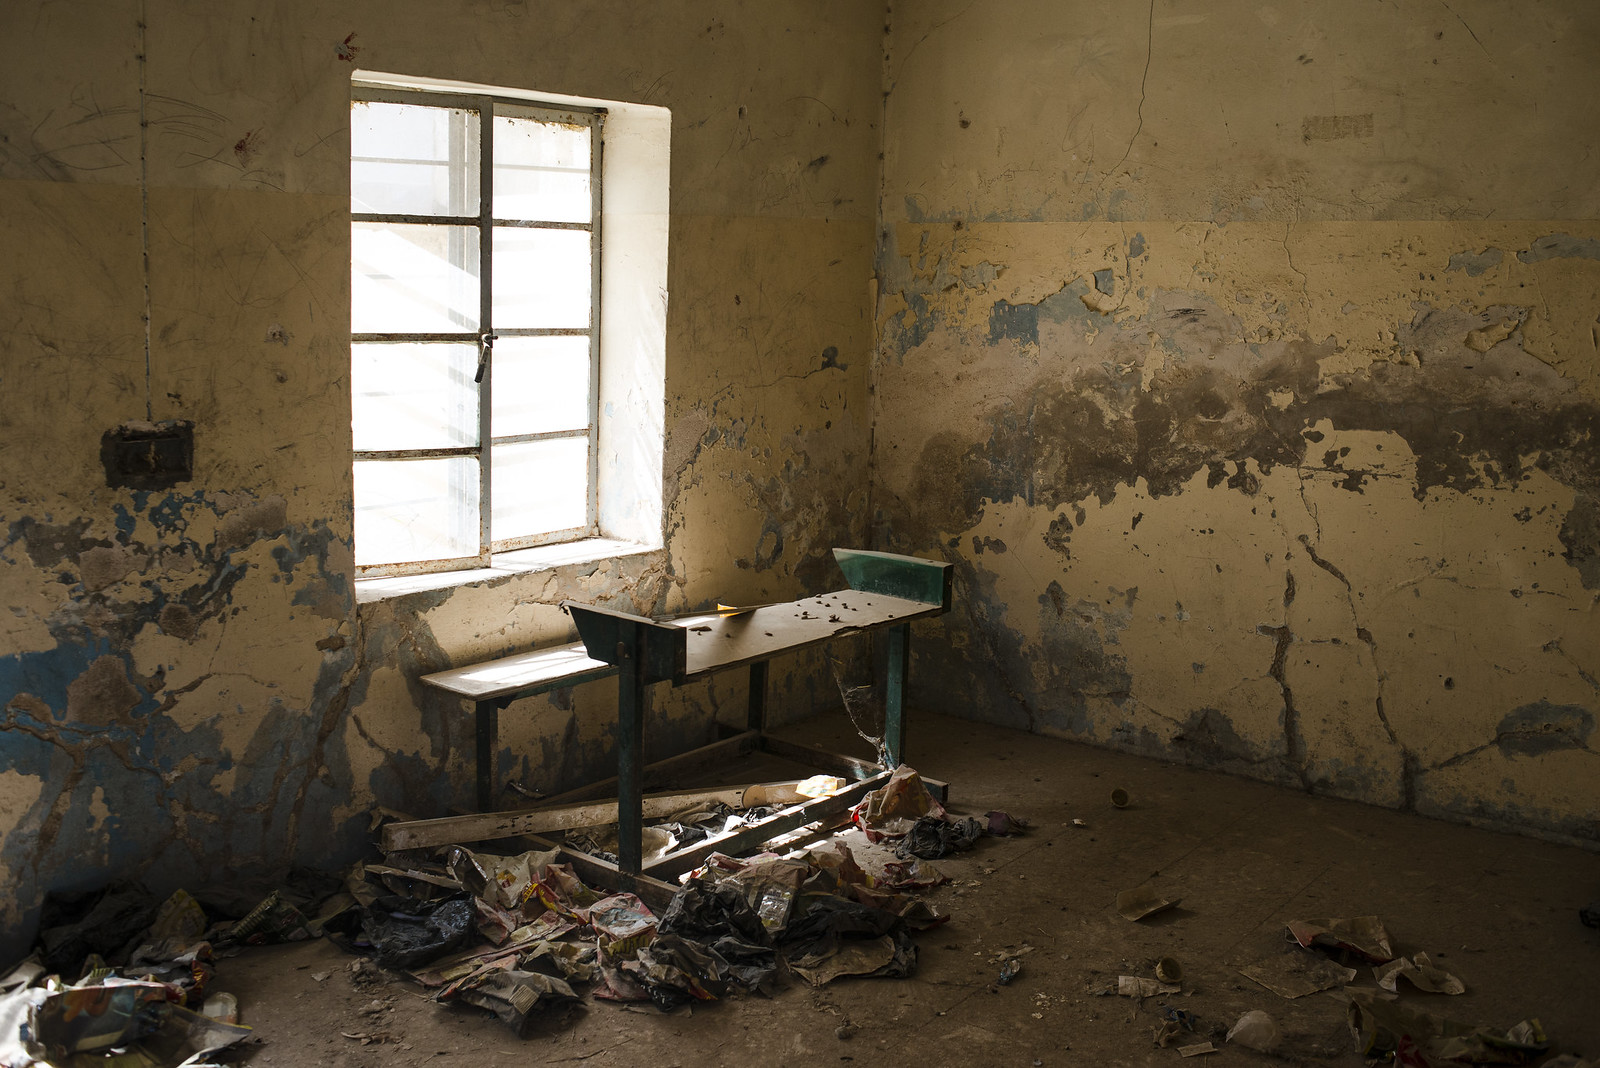 09 A view of the old, disused classrooms at the Gogjali School, before eastern Mosul was liberated. | by trust.org